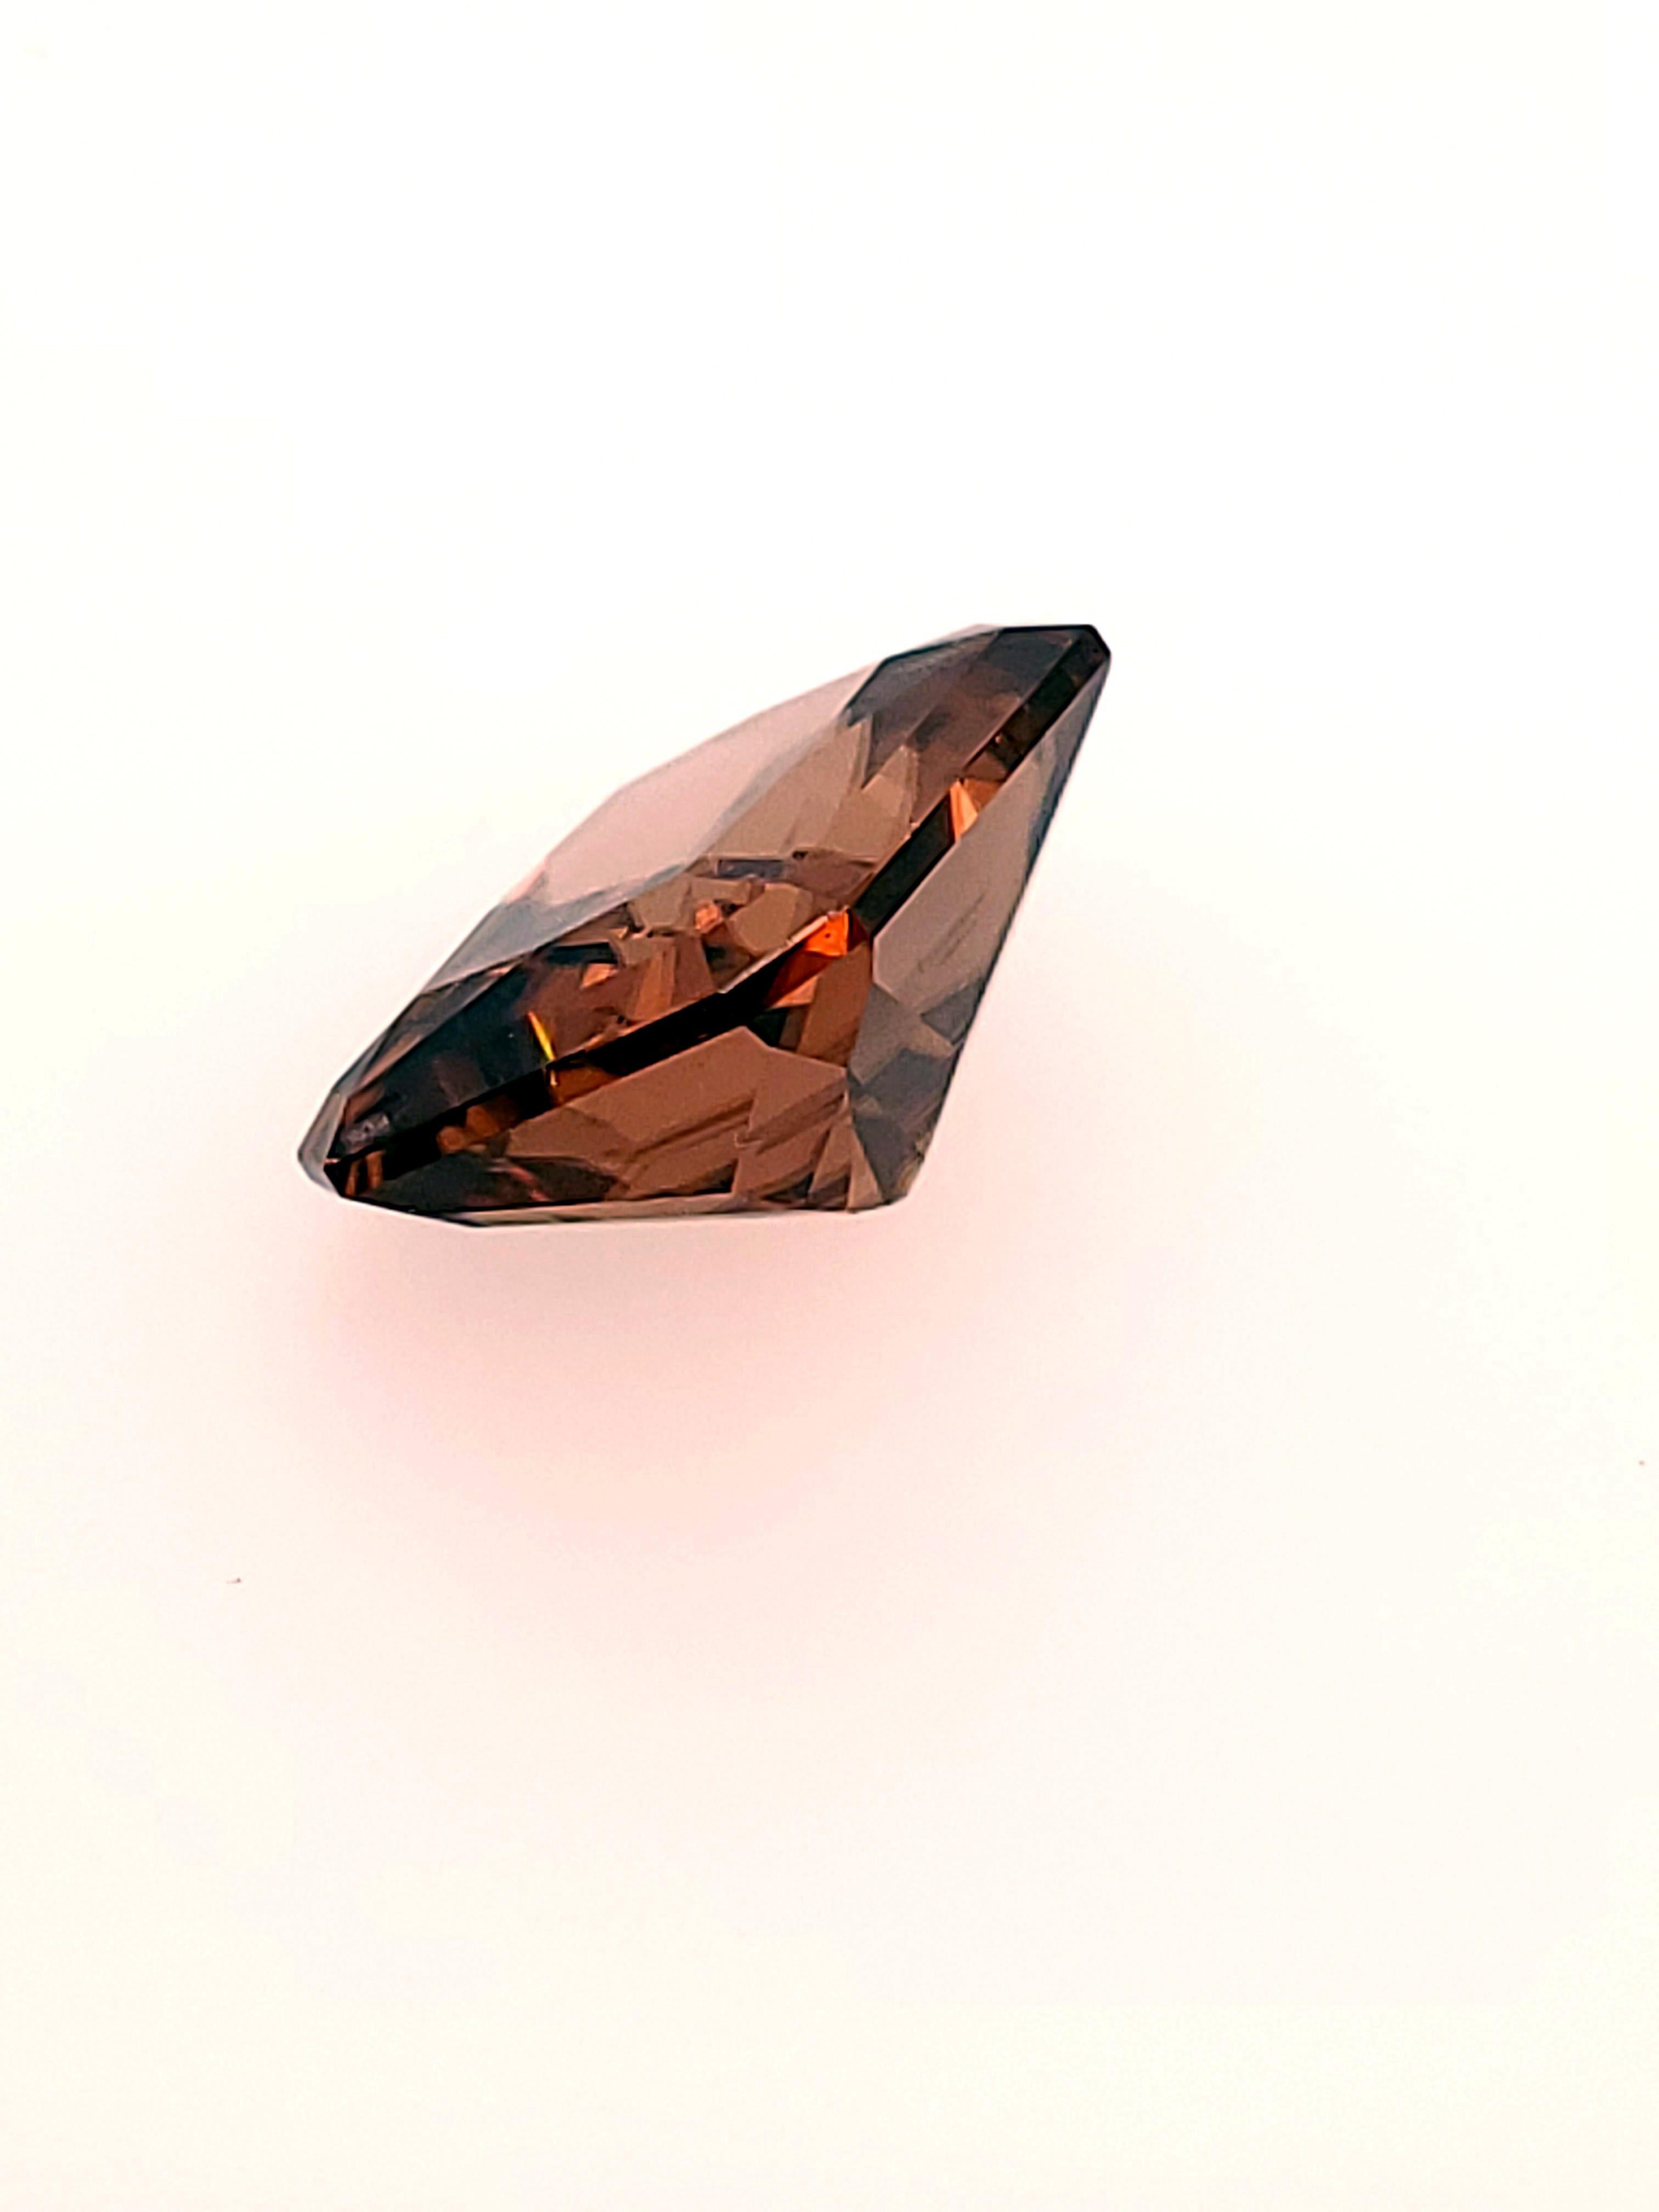 Orangy Zircon, Emerald Cut, weighing 8.71ct and Faceted in the U.S. For Sale 1